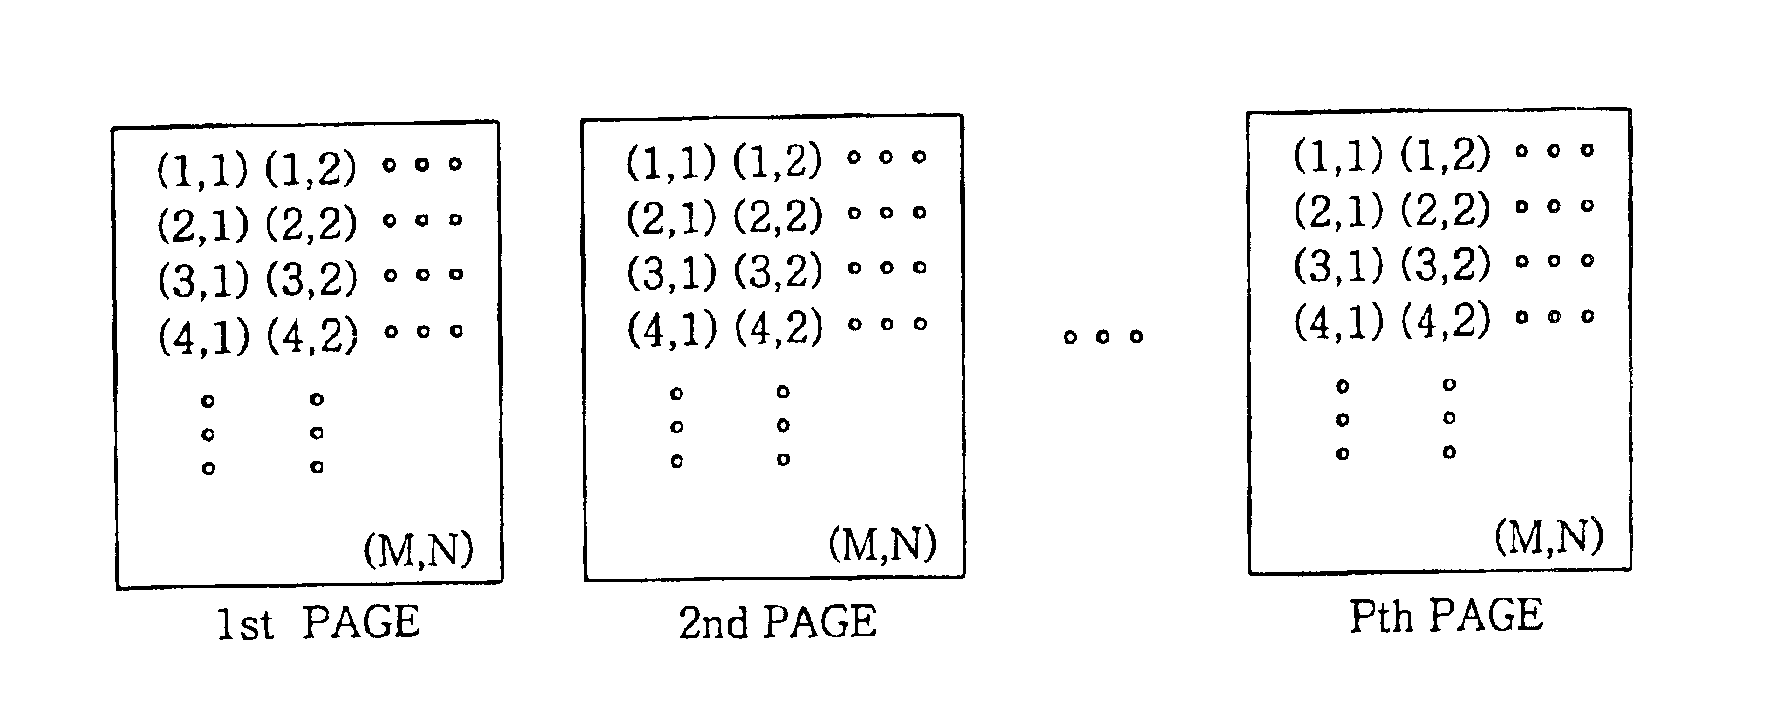 Data input method for a holographic digital data storage system